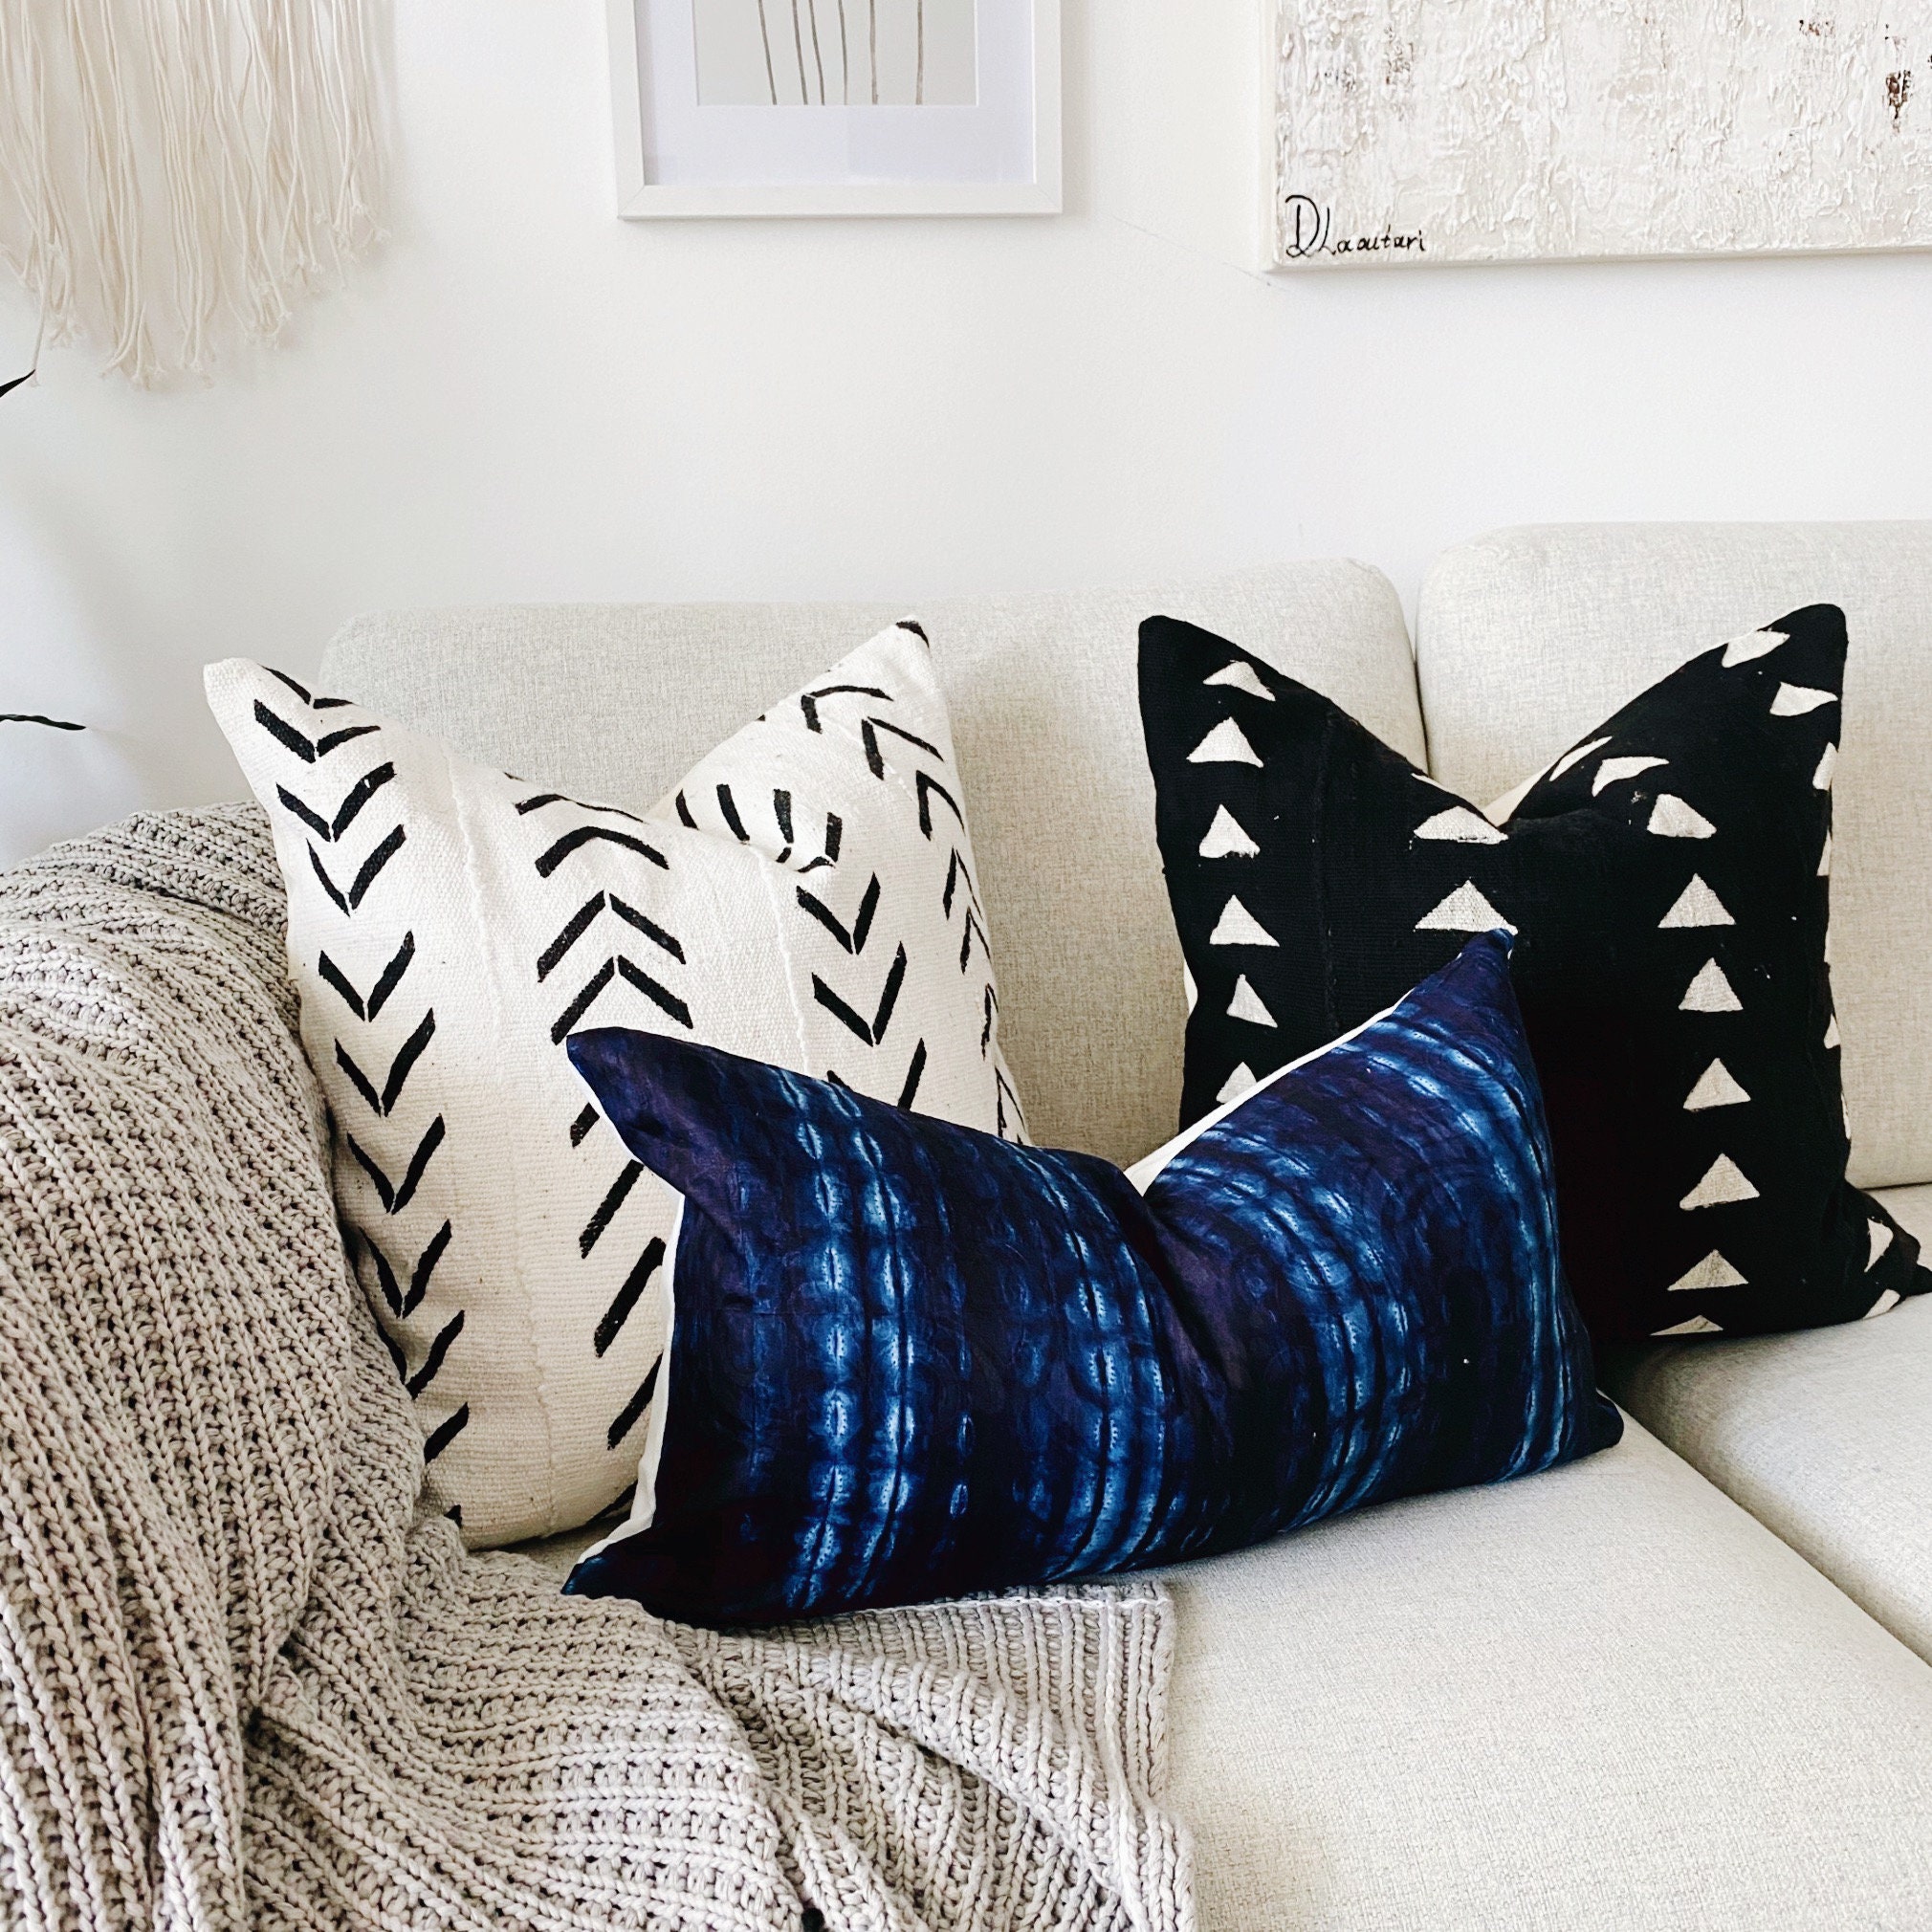 Mudcloth Pillow Black and White Triangle Mud Cloth Pillow - Etsy